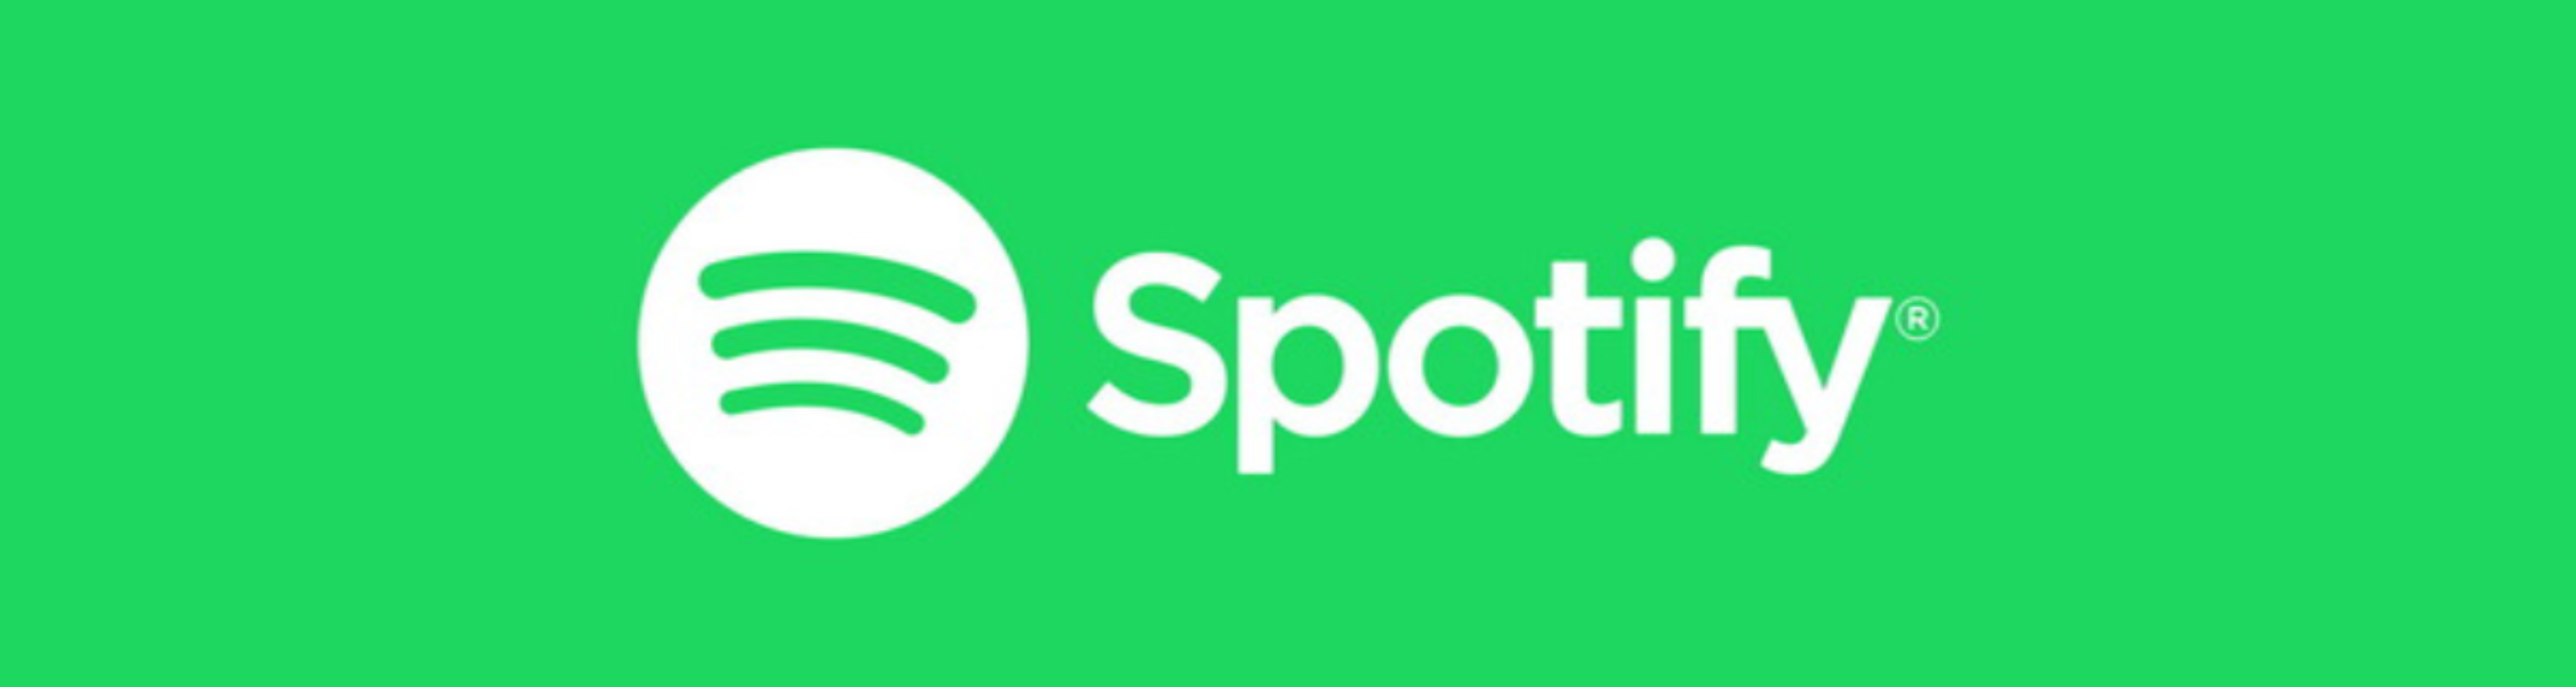 banner-custoprojects-spotify